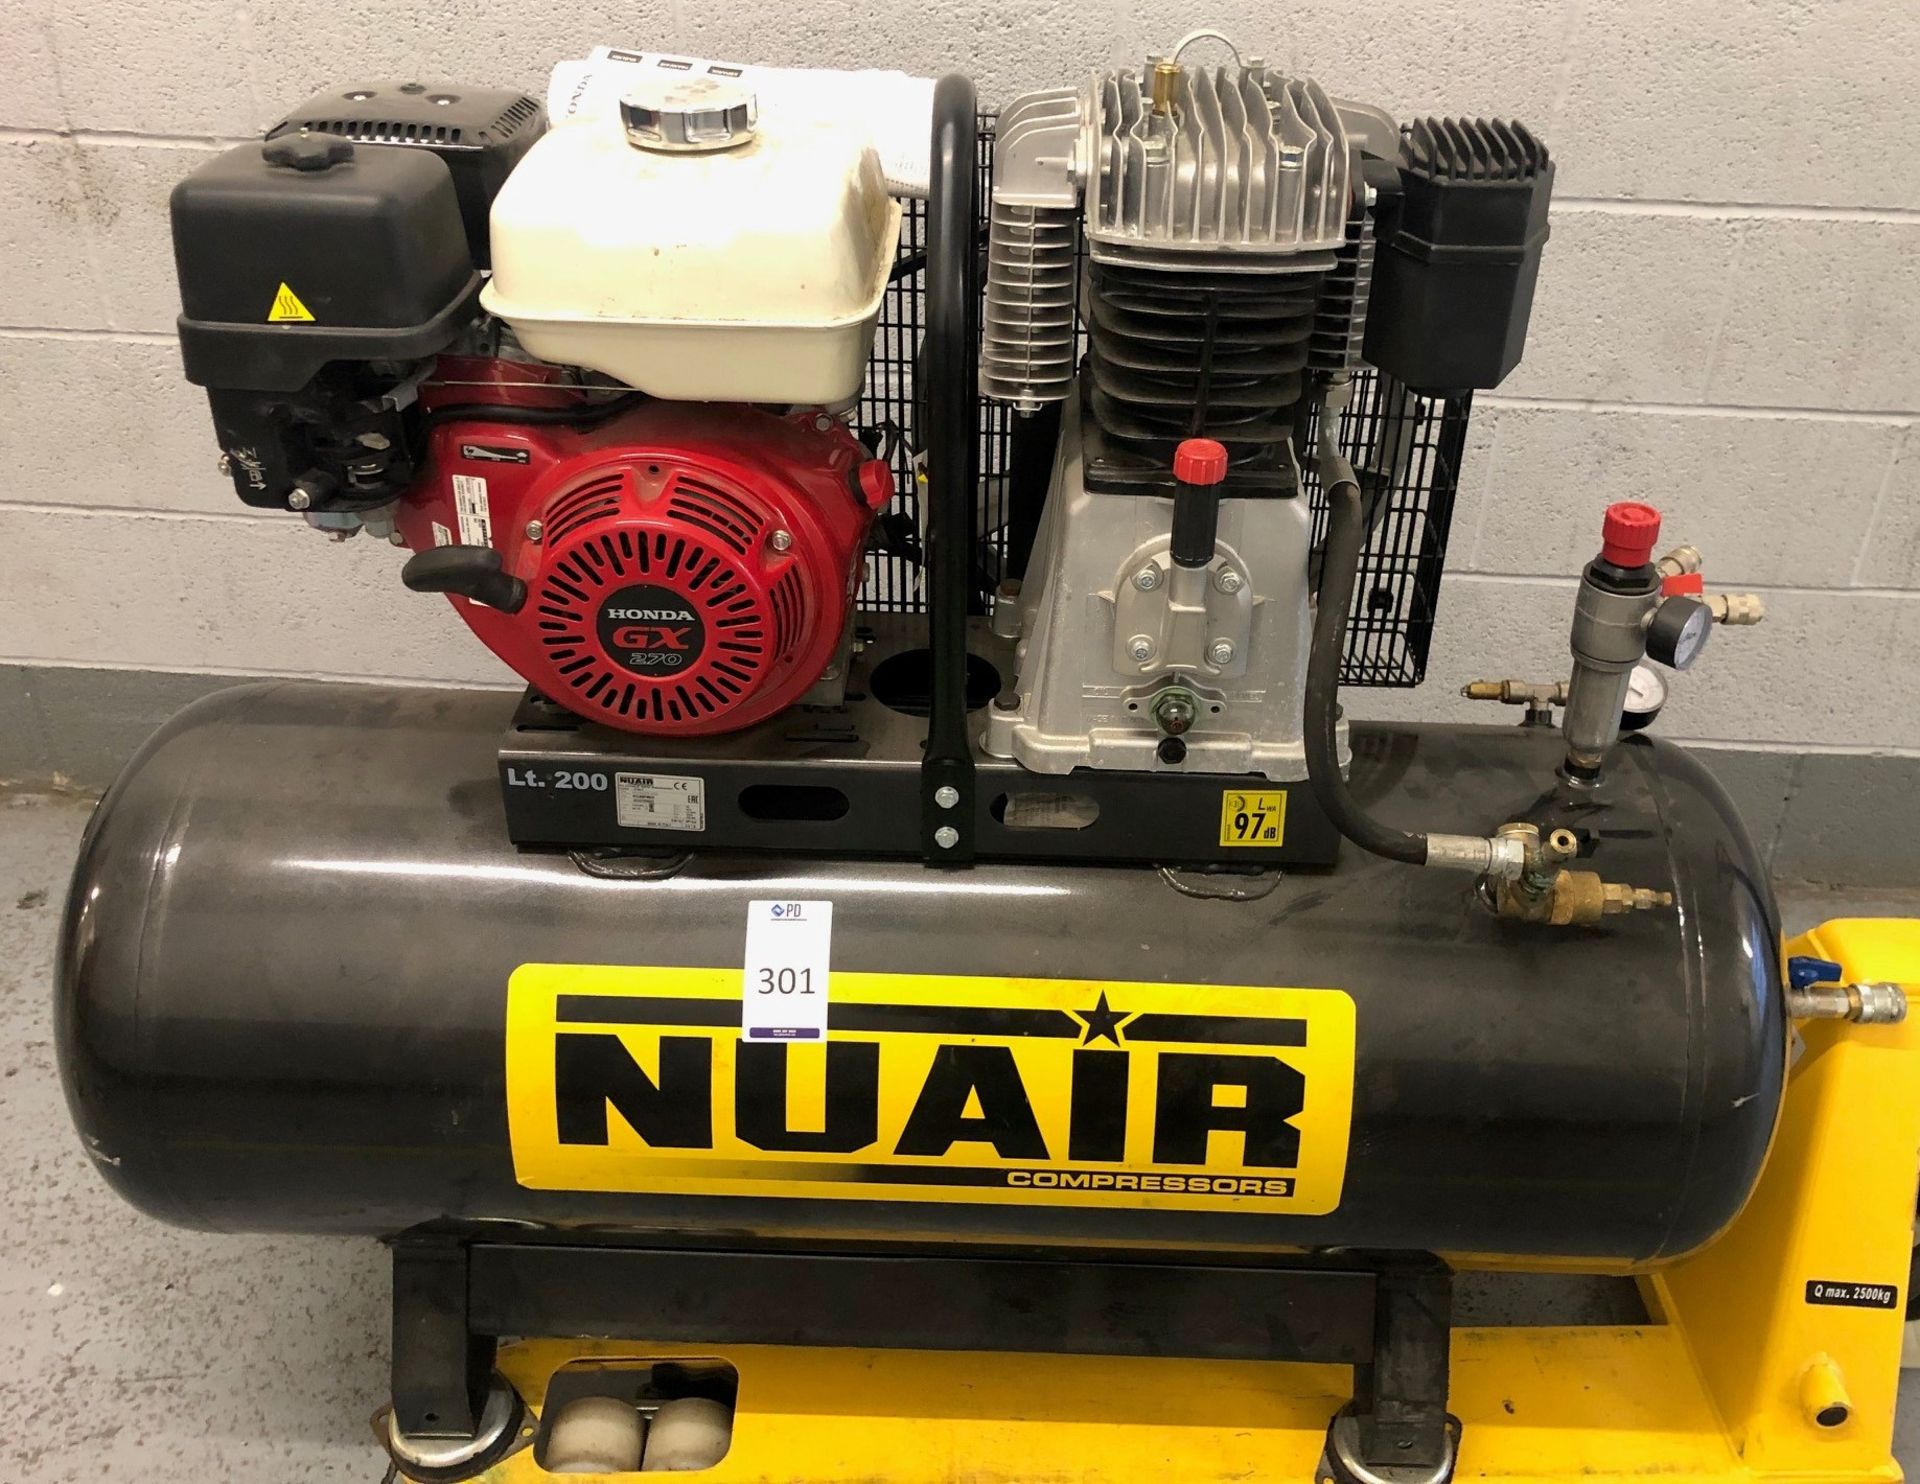 NuAir NB7/98/200F receiver mounted petrol powered compressor with Honda gx270 engine (pallet truck n - Image 3 of 4